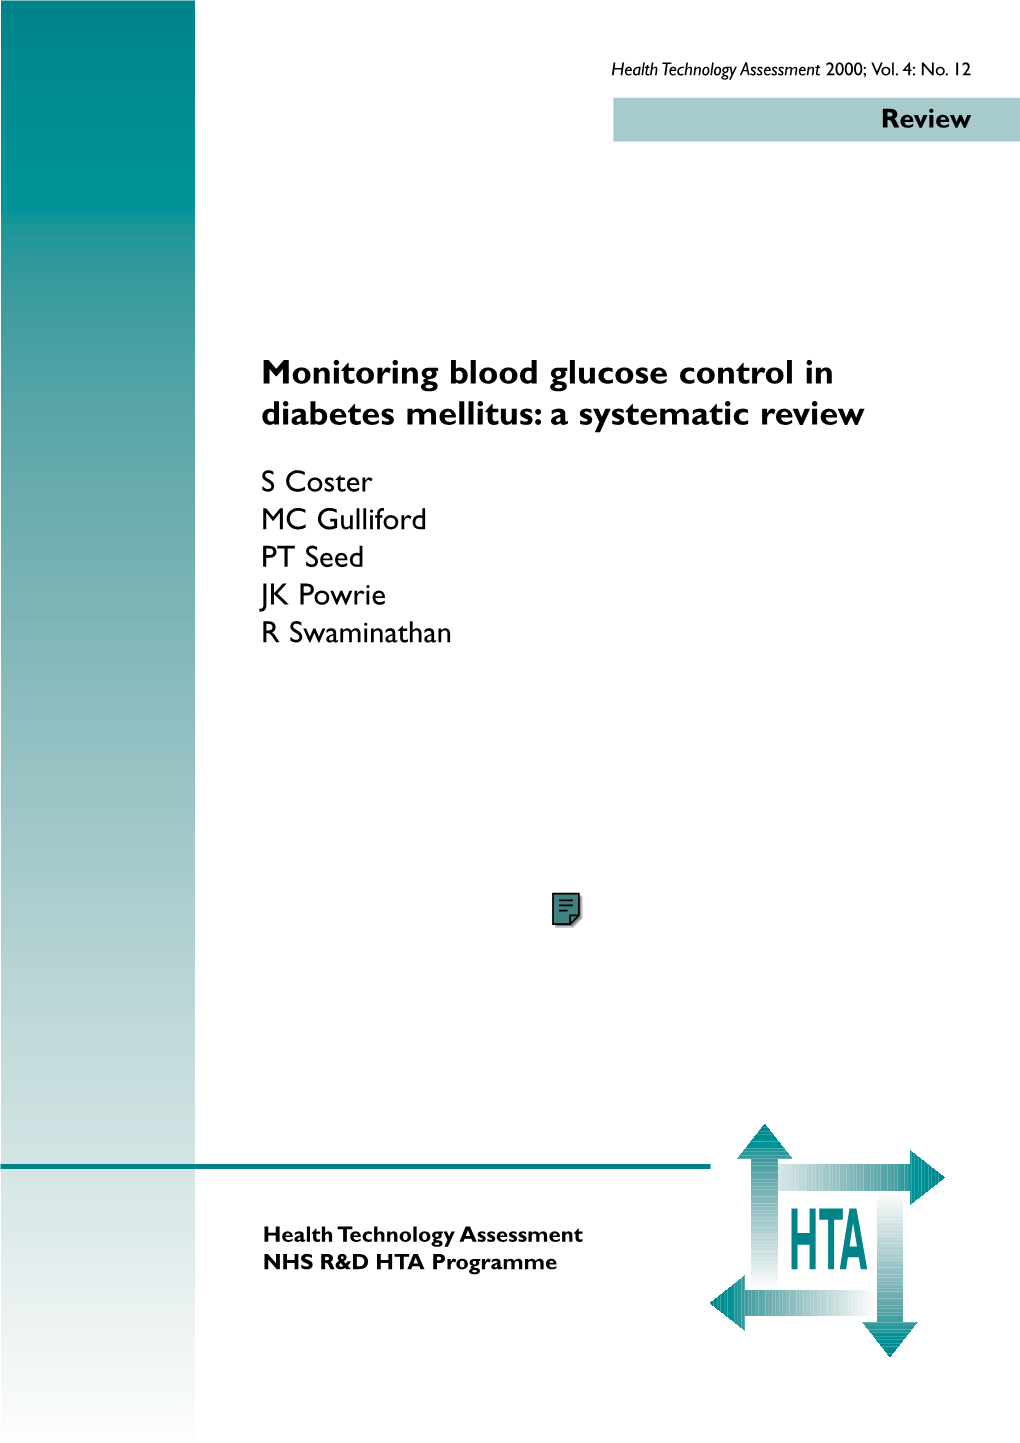 Monitoring Blood Glucose Control in Diabetes Mellitus: a Systematic Review